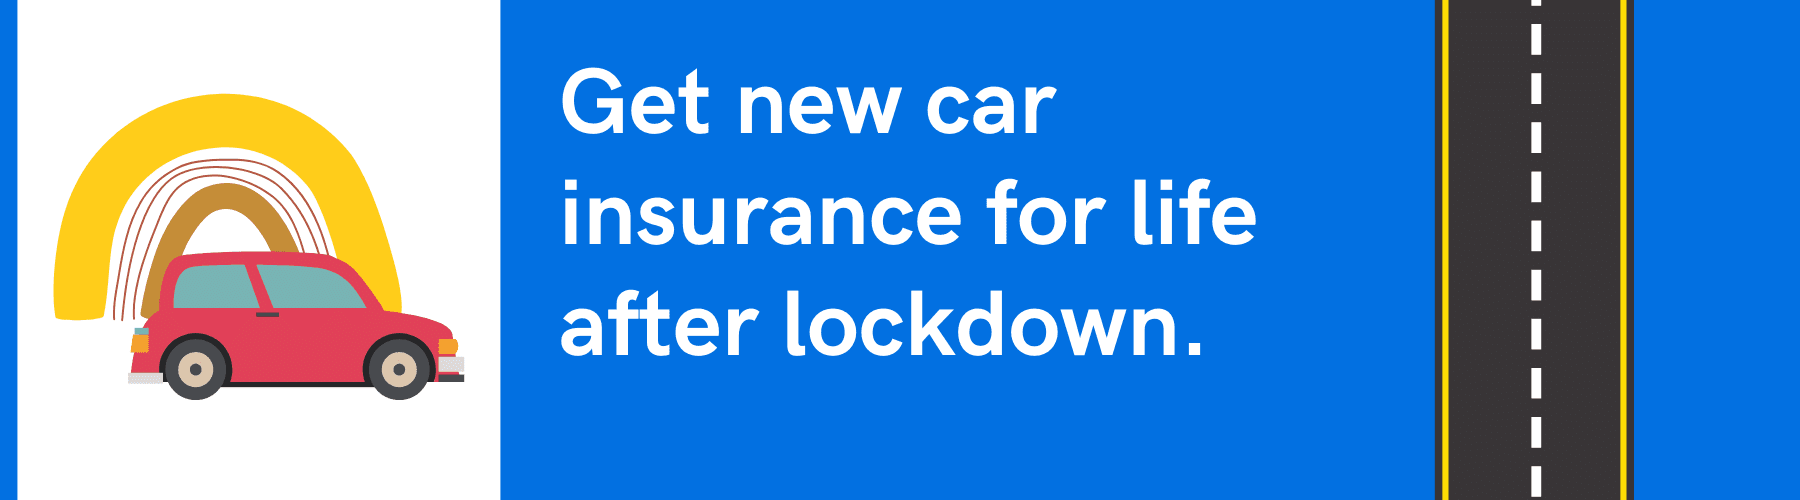 Get new car insurance for life after lockdown